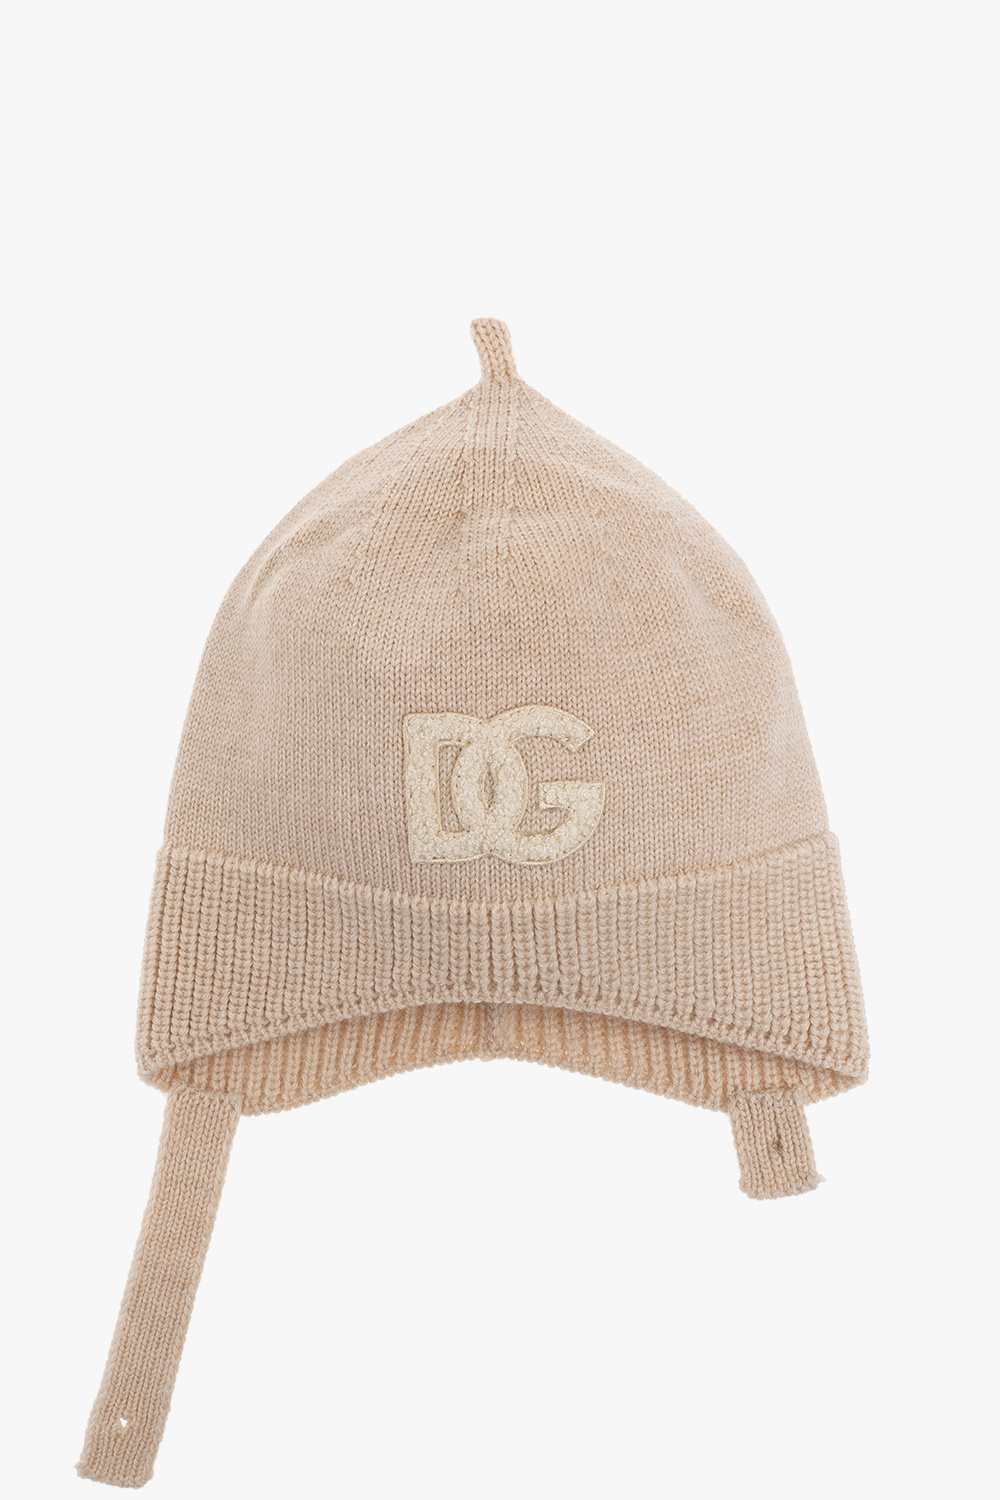 Krups KP 1A05 Piccolo XS Dolce Gusto Κάψουλες Καφετιέρα Beanie with logo